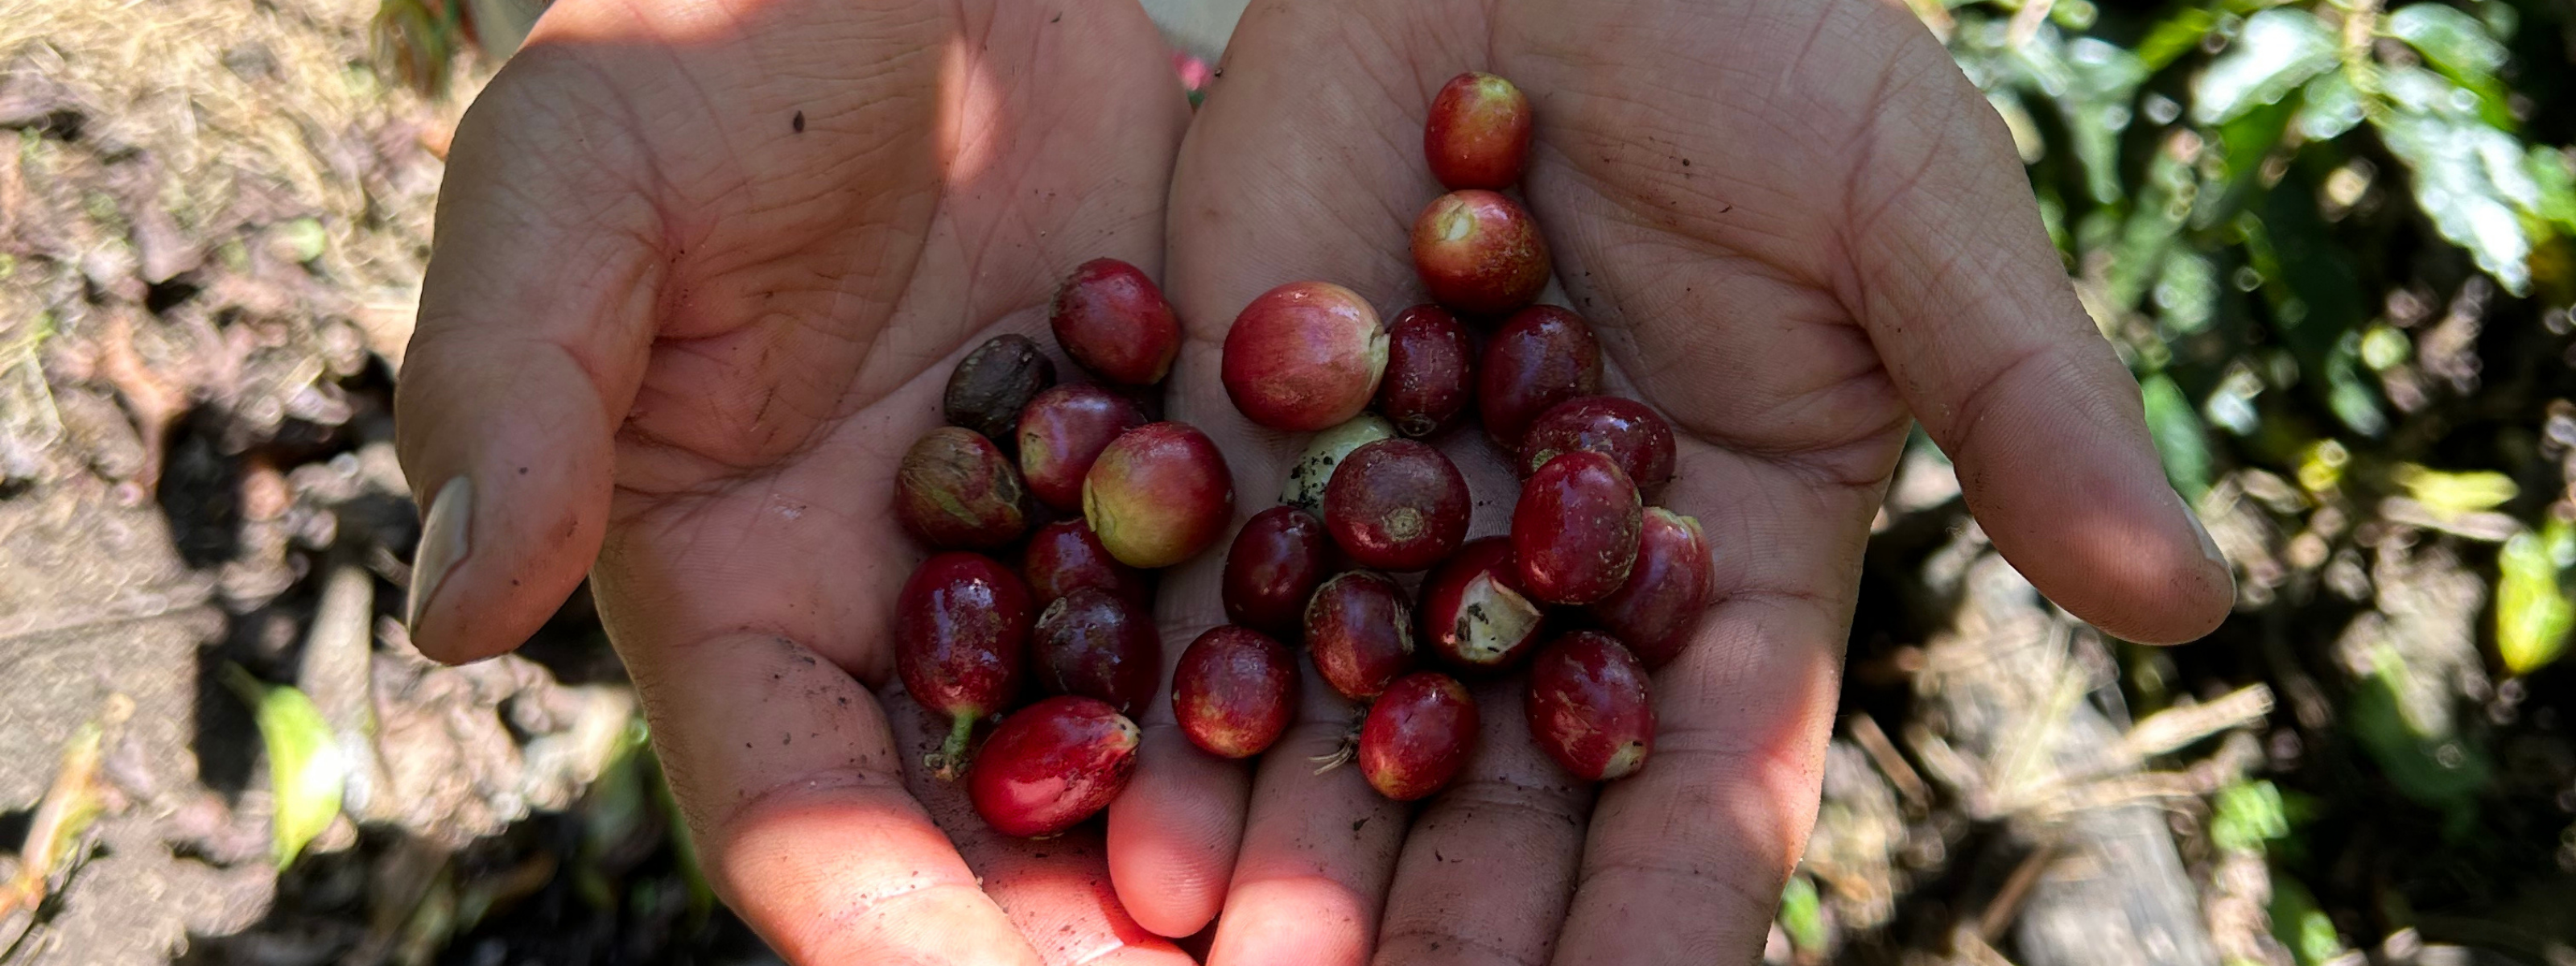 close up of hands holding coffee cherries